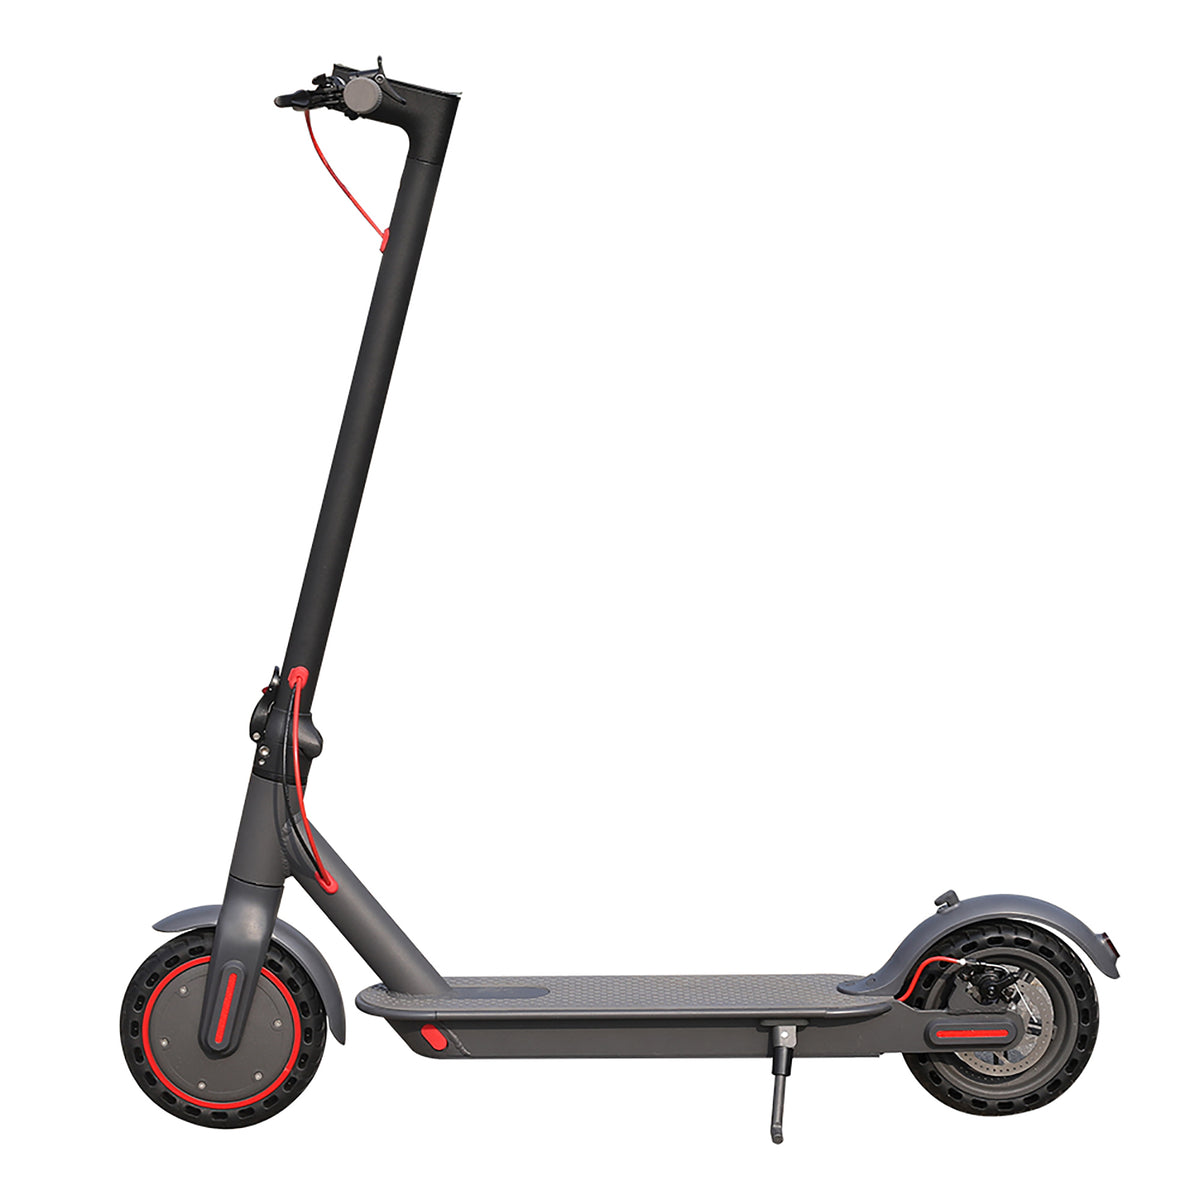 Side view of the ES60 Electric Scooter with a 36V 10.5Ah Battery.